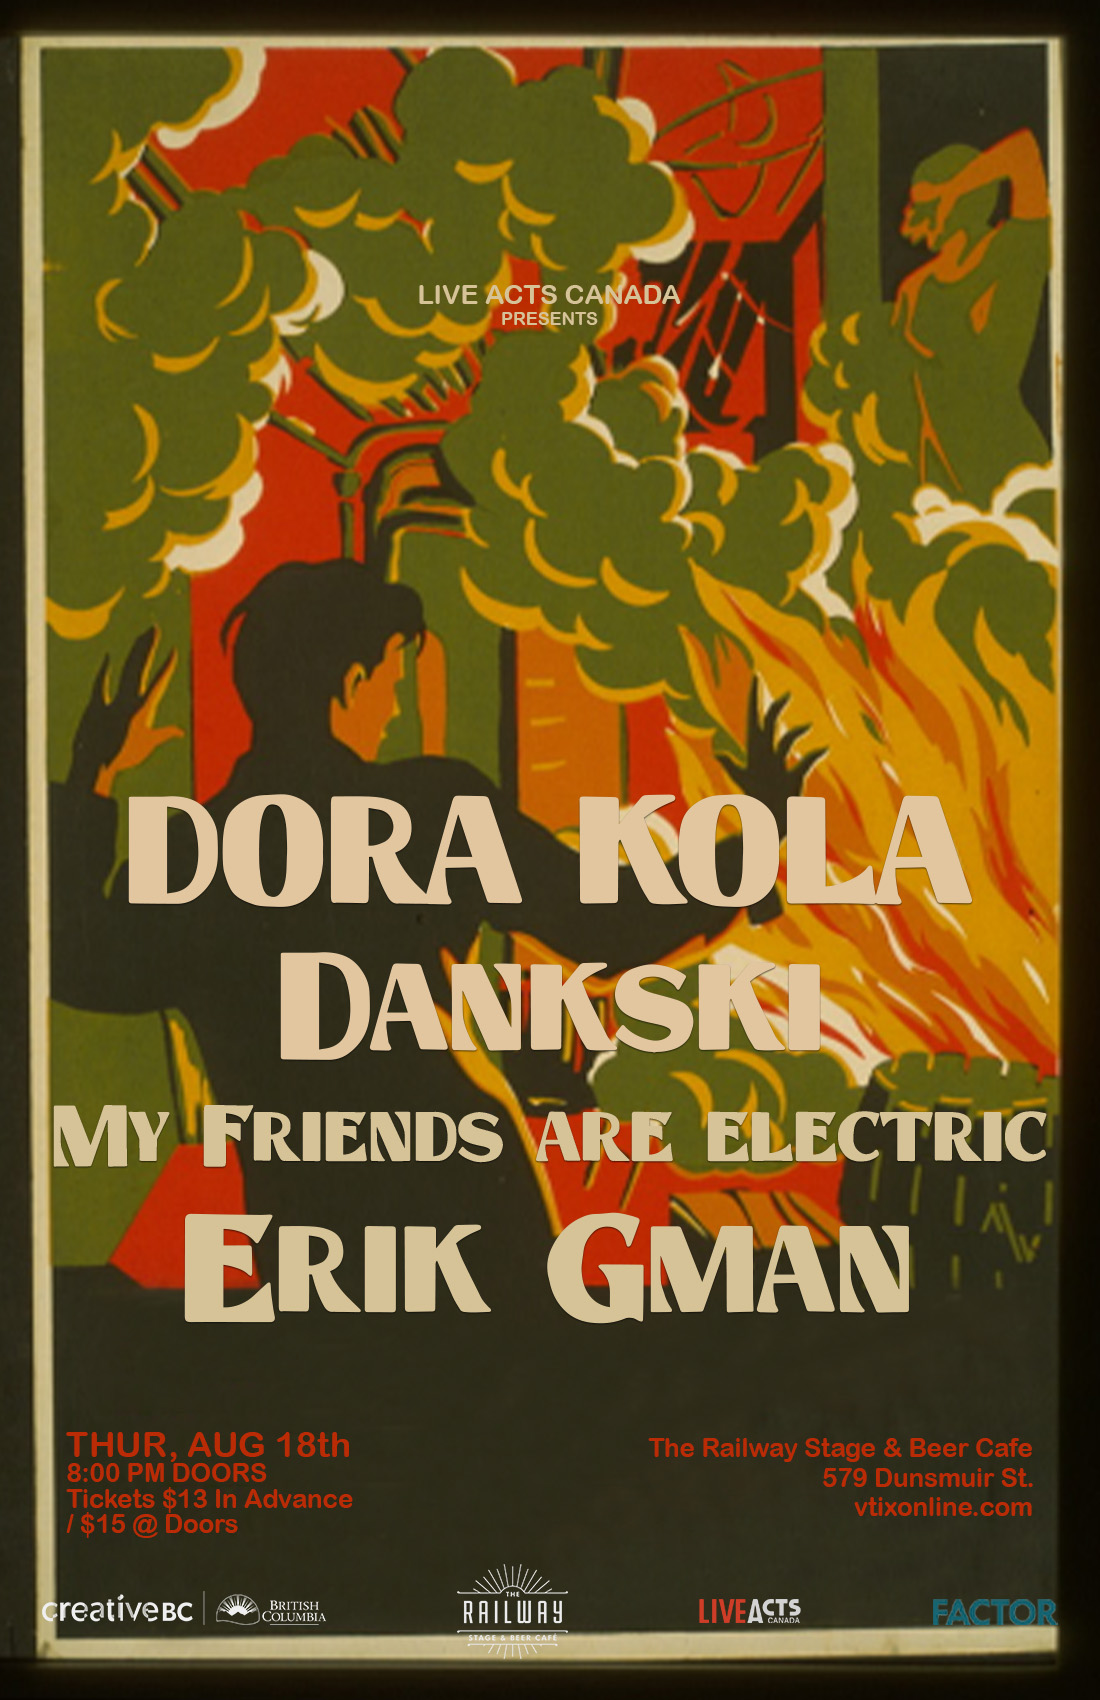 Dora Kola With Special Guests, Dankski, My Friends are electric, and Erik Gman